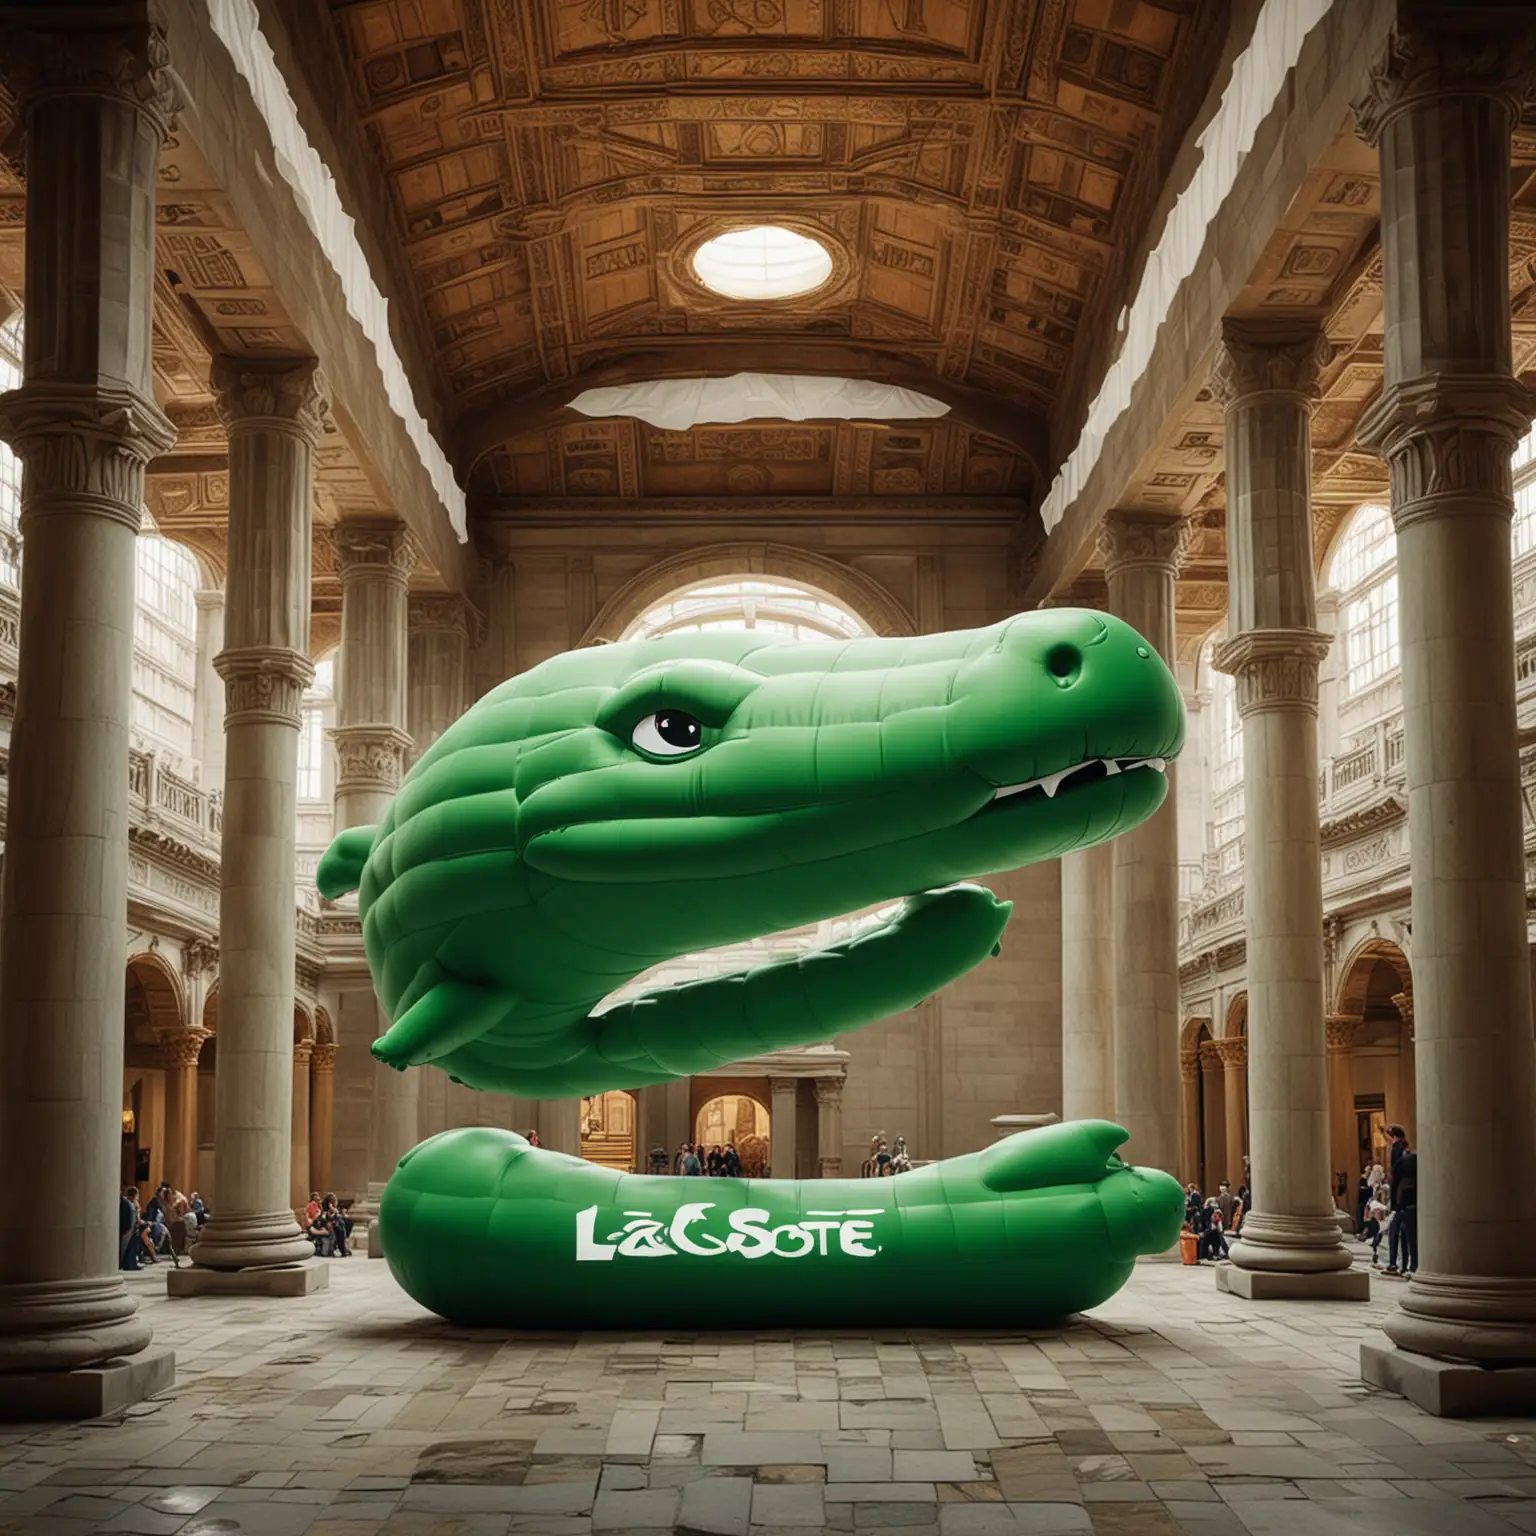 huge inflatable green Lacoste logo floating inside a temple, make the environment lika a rennesaince painting, ultra realistic image